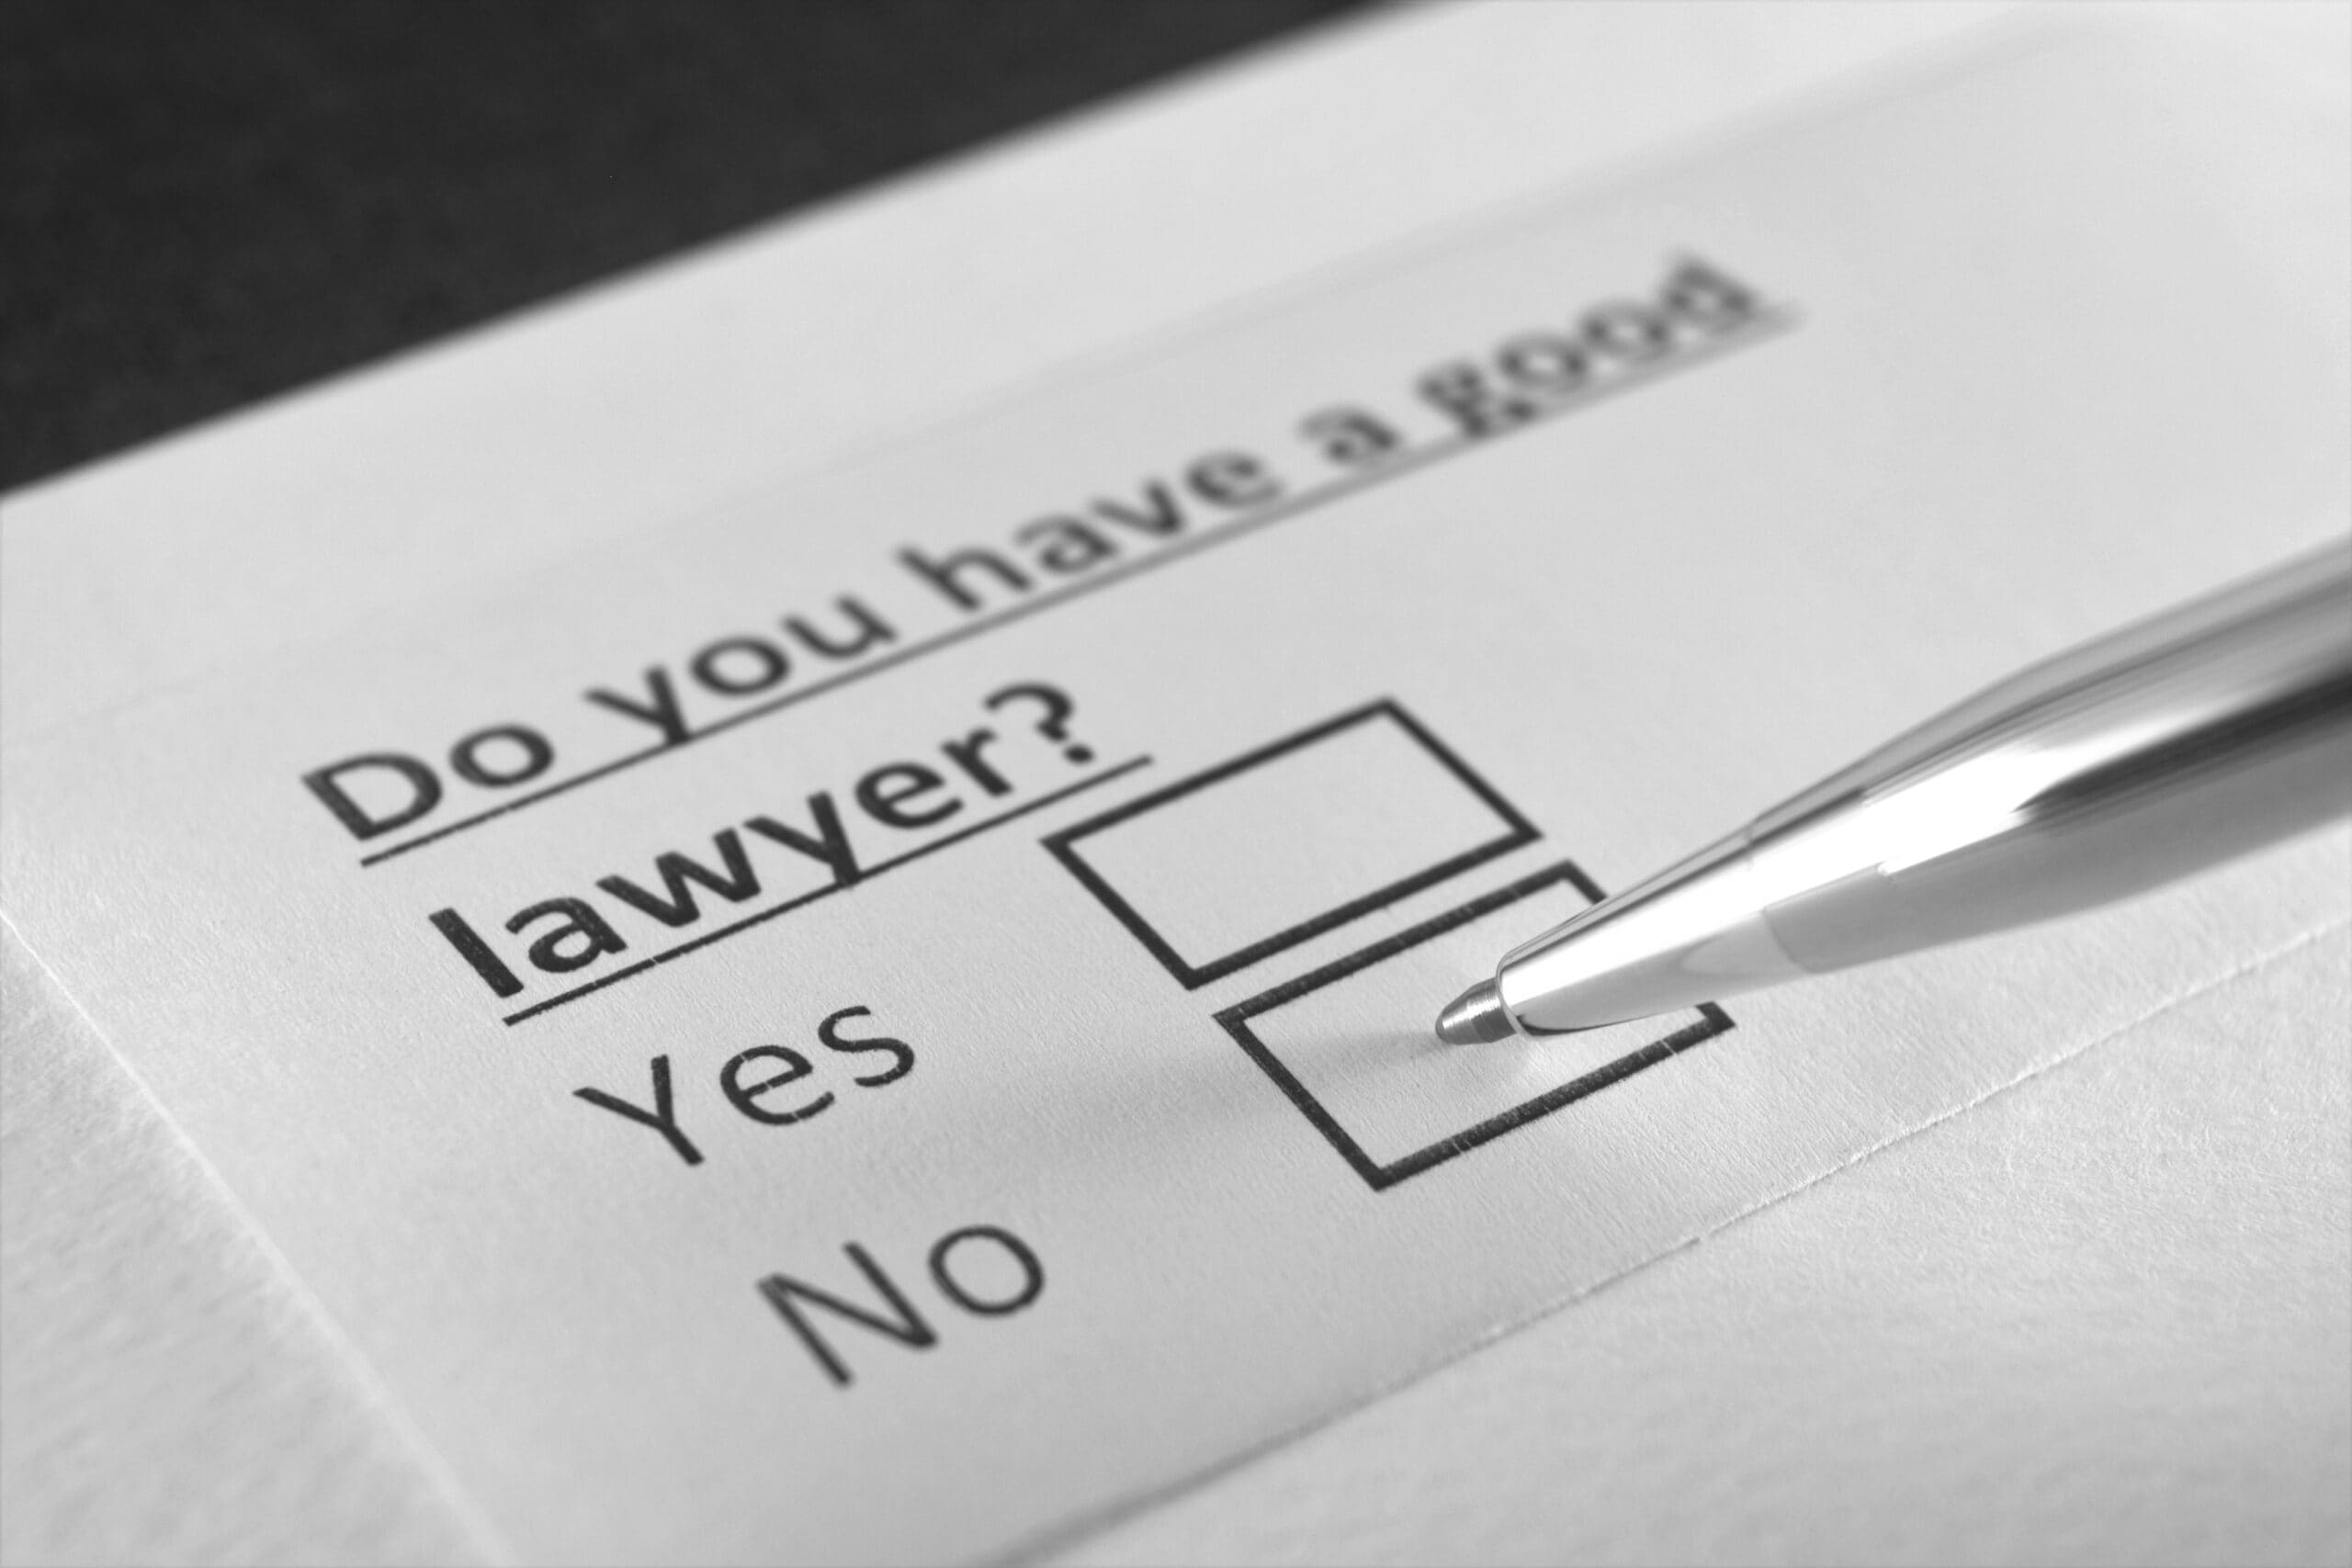 Do you have a good lawyer?